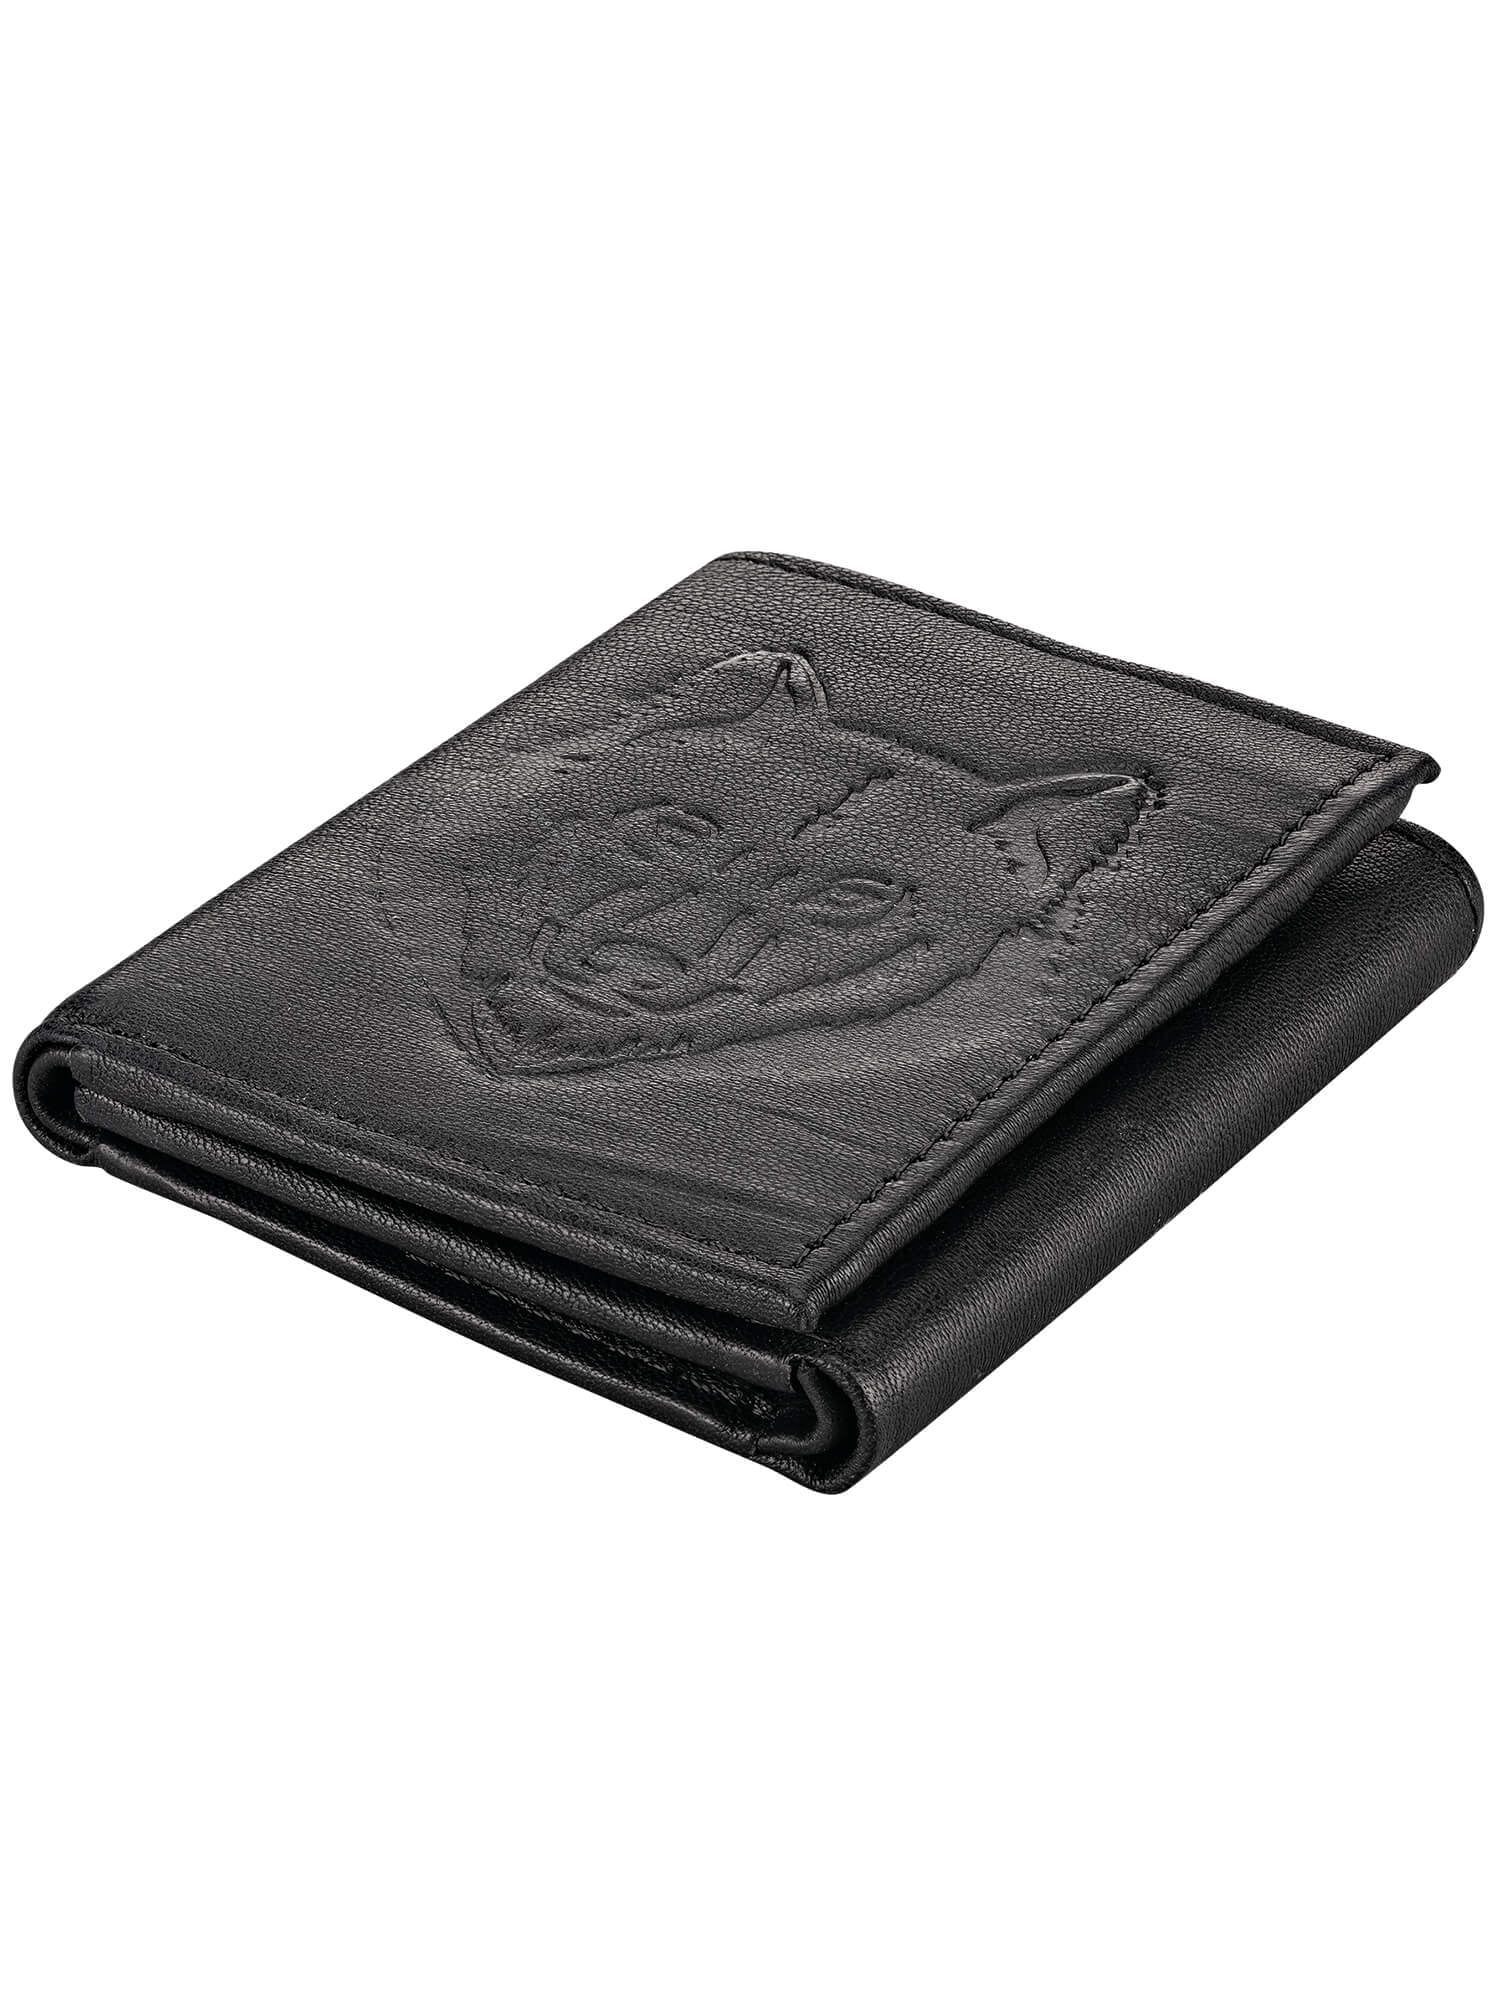 Genuine Leather Animal Embossed Wallets, Crafted with 100% Genuine Leather,  Accessories - Bass Design, Measures 4 3/4